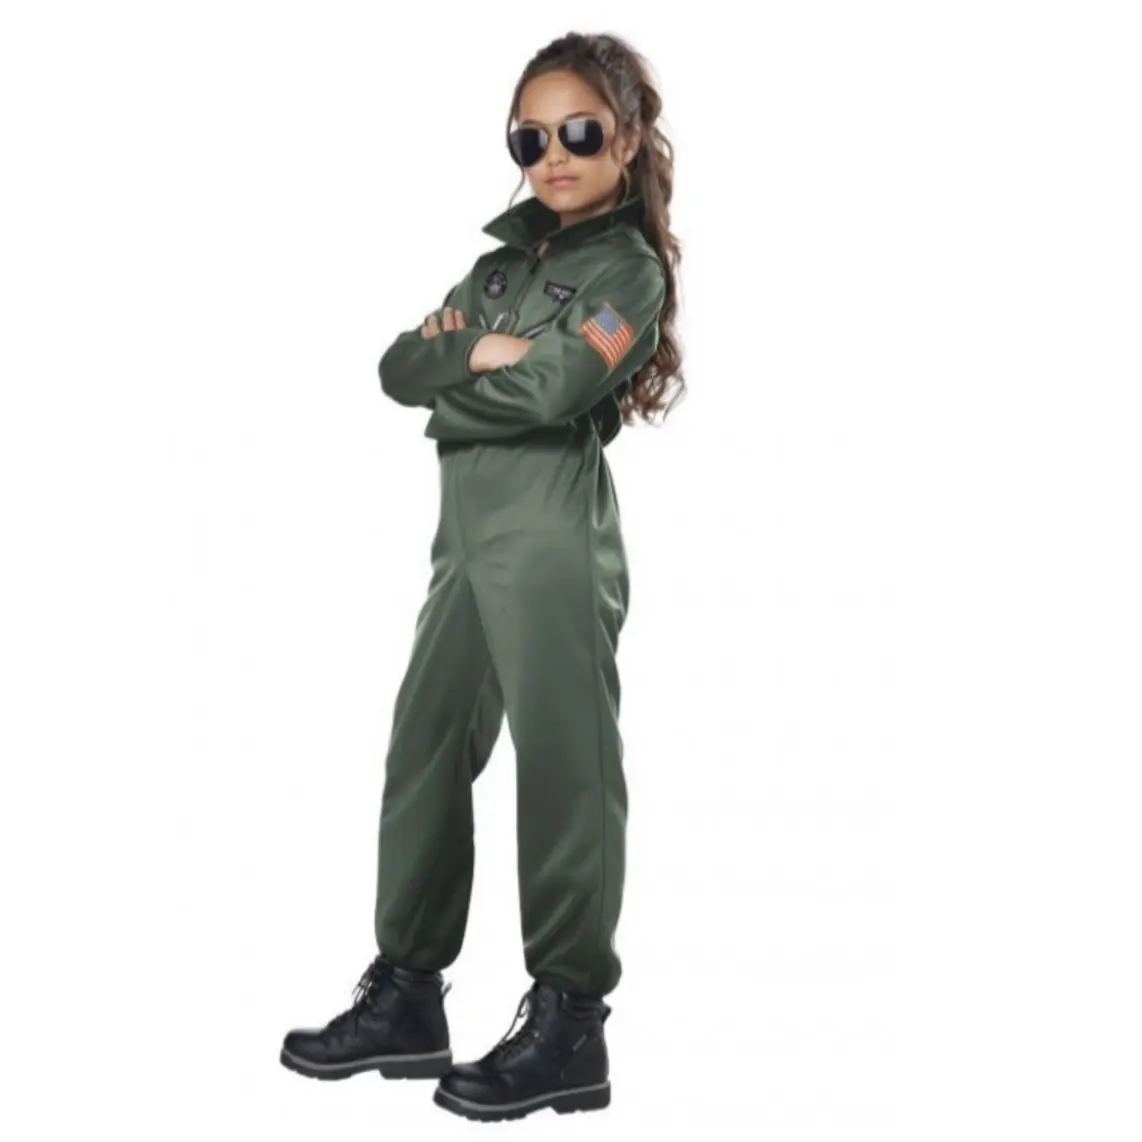 2022 New Aviator Flightsuit Air Cadet Uniform Military Fighter Pilot Halloween Party o Carnival costumi Cosplay per bambini